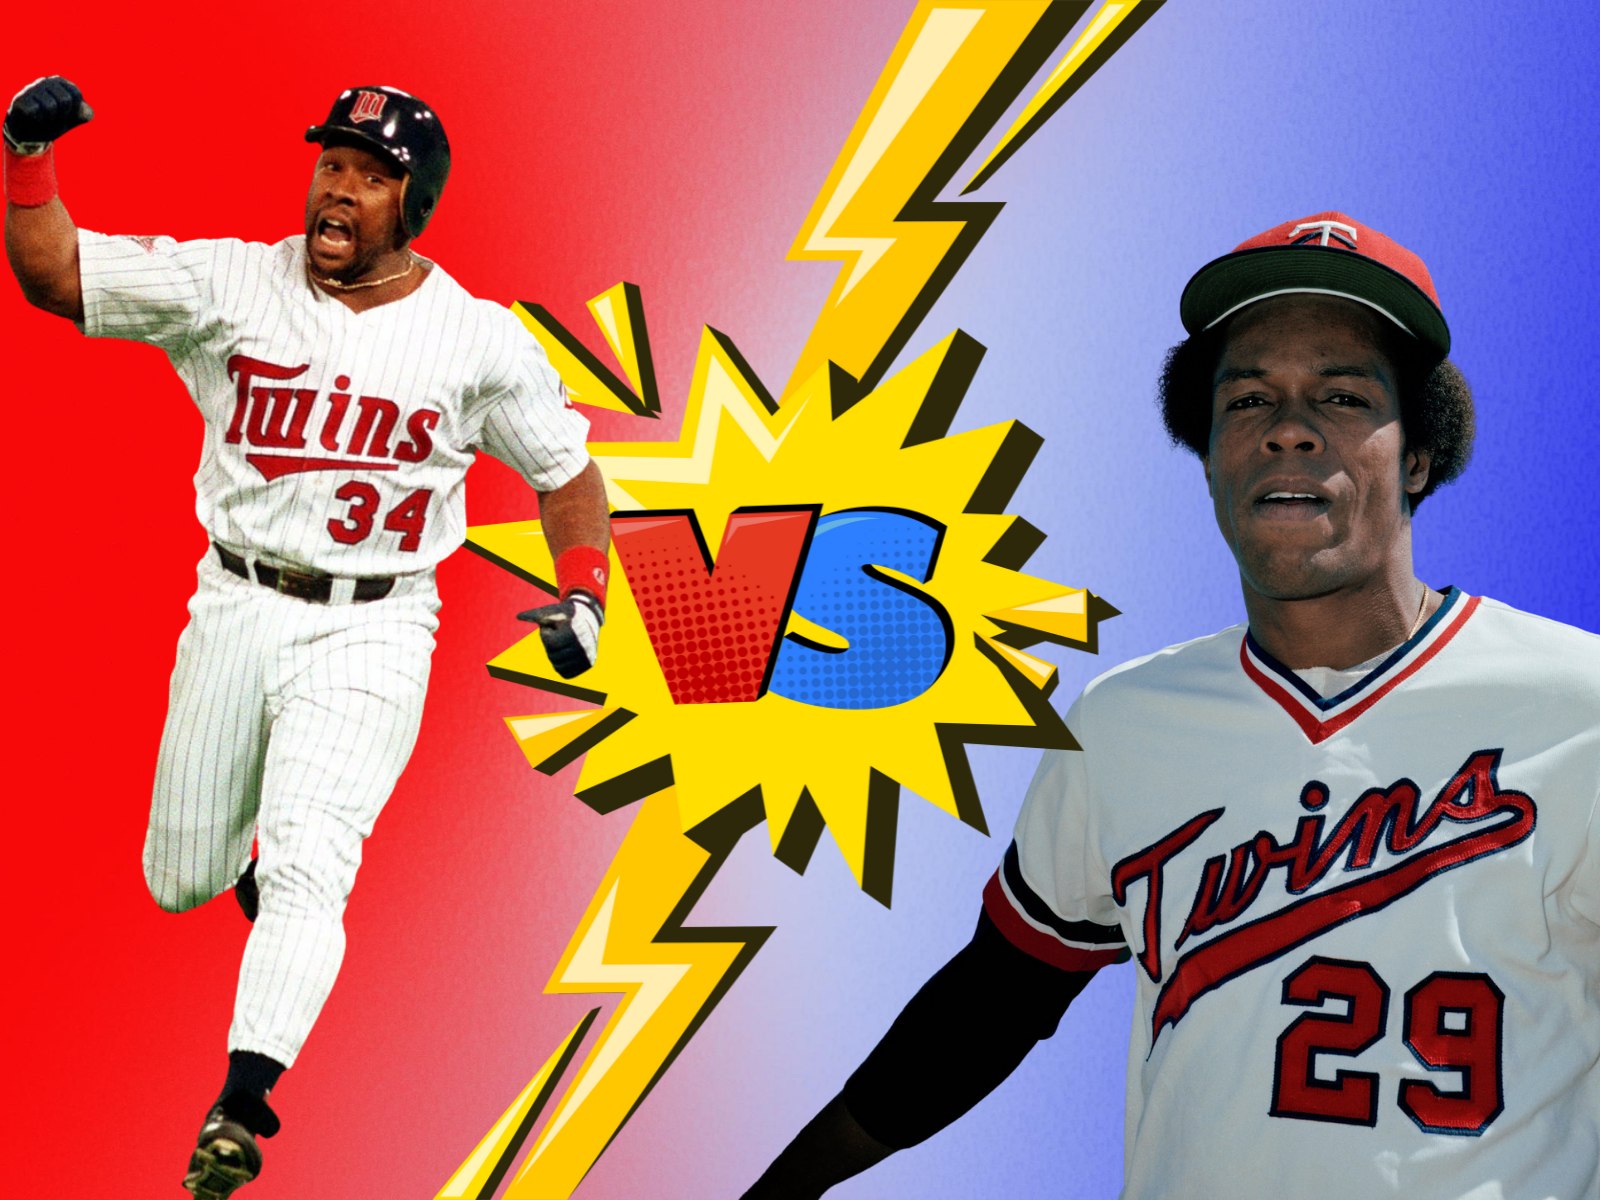 Rod Carew or Kirby Puckett: Who Had the Better Career? - Twins - Twins Daily